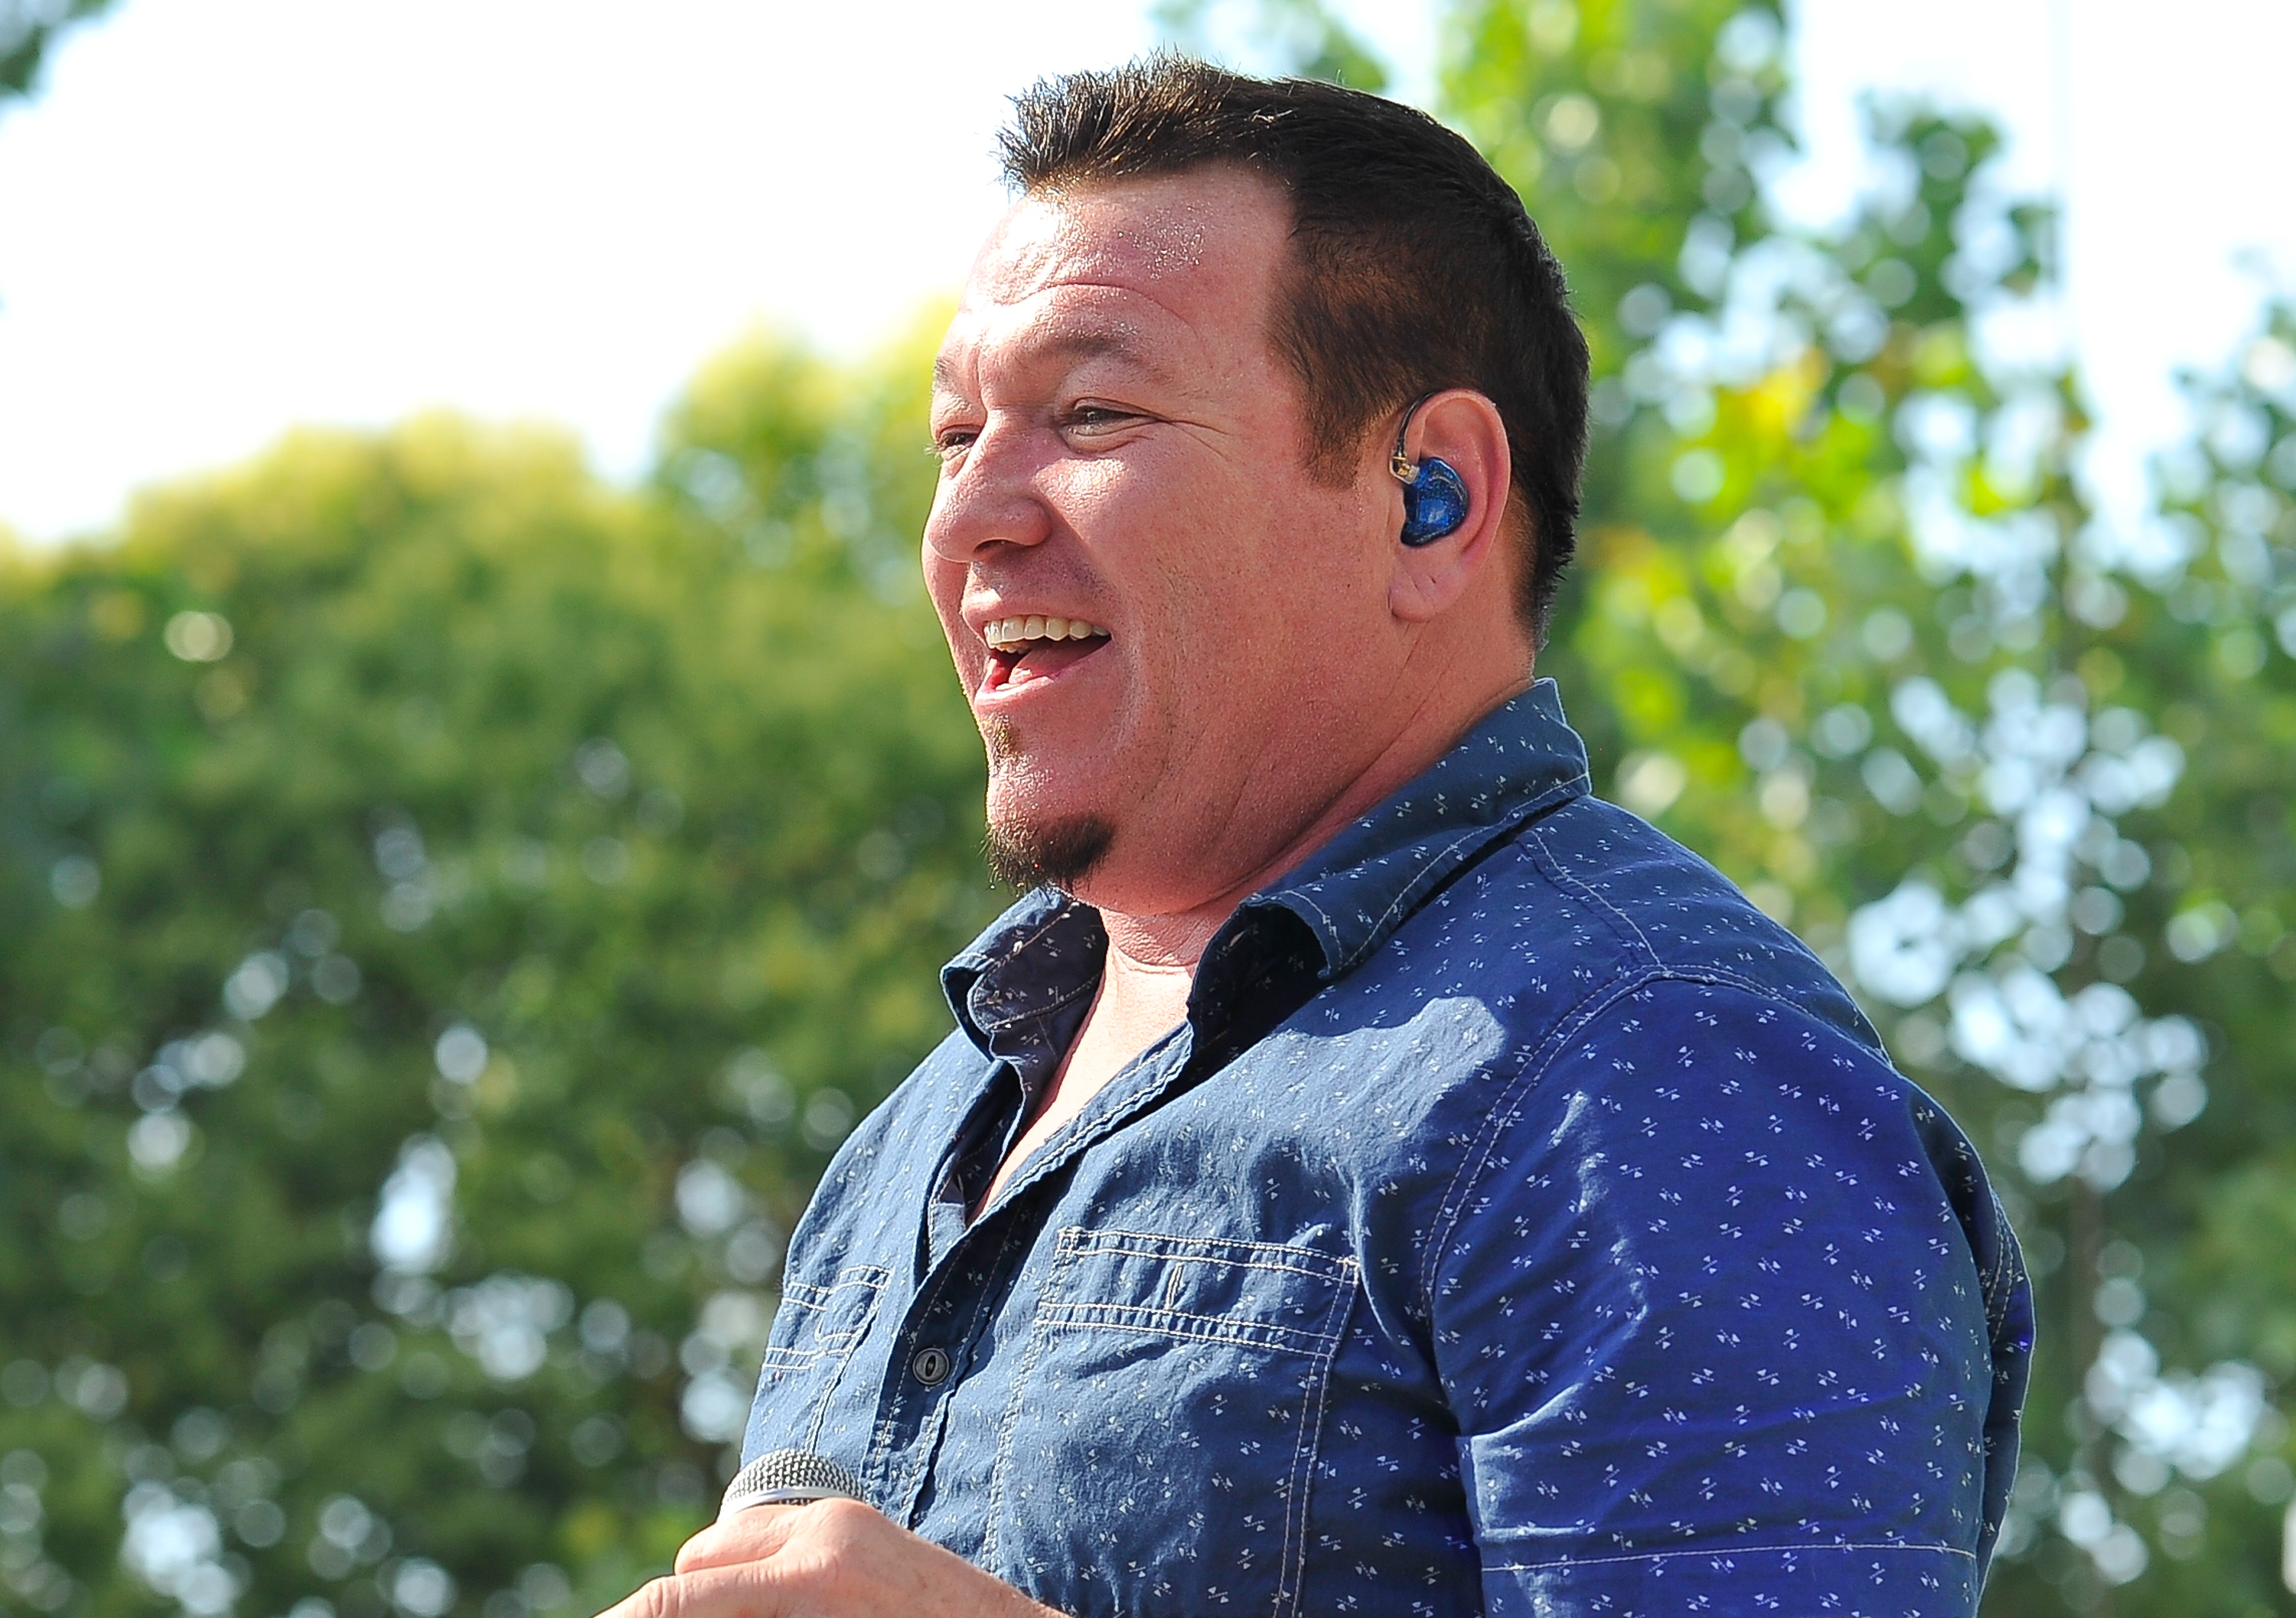 The former Smash Mouth musician was snubbed from the heartbreaking In Memoriam segment